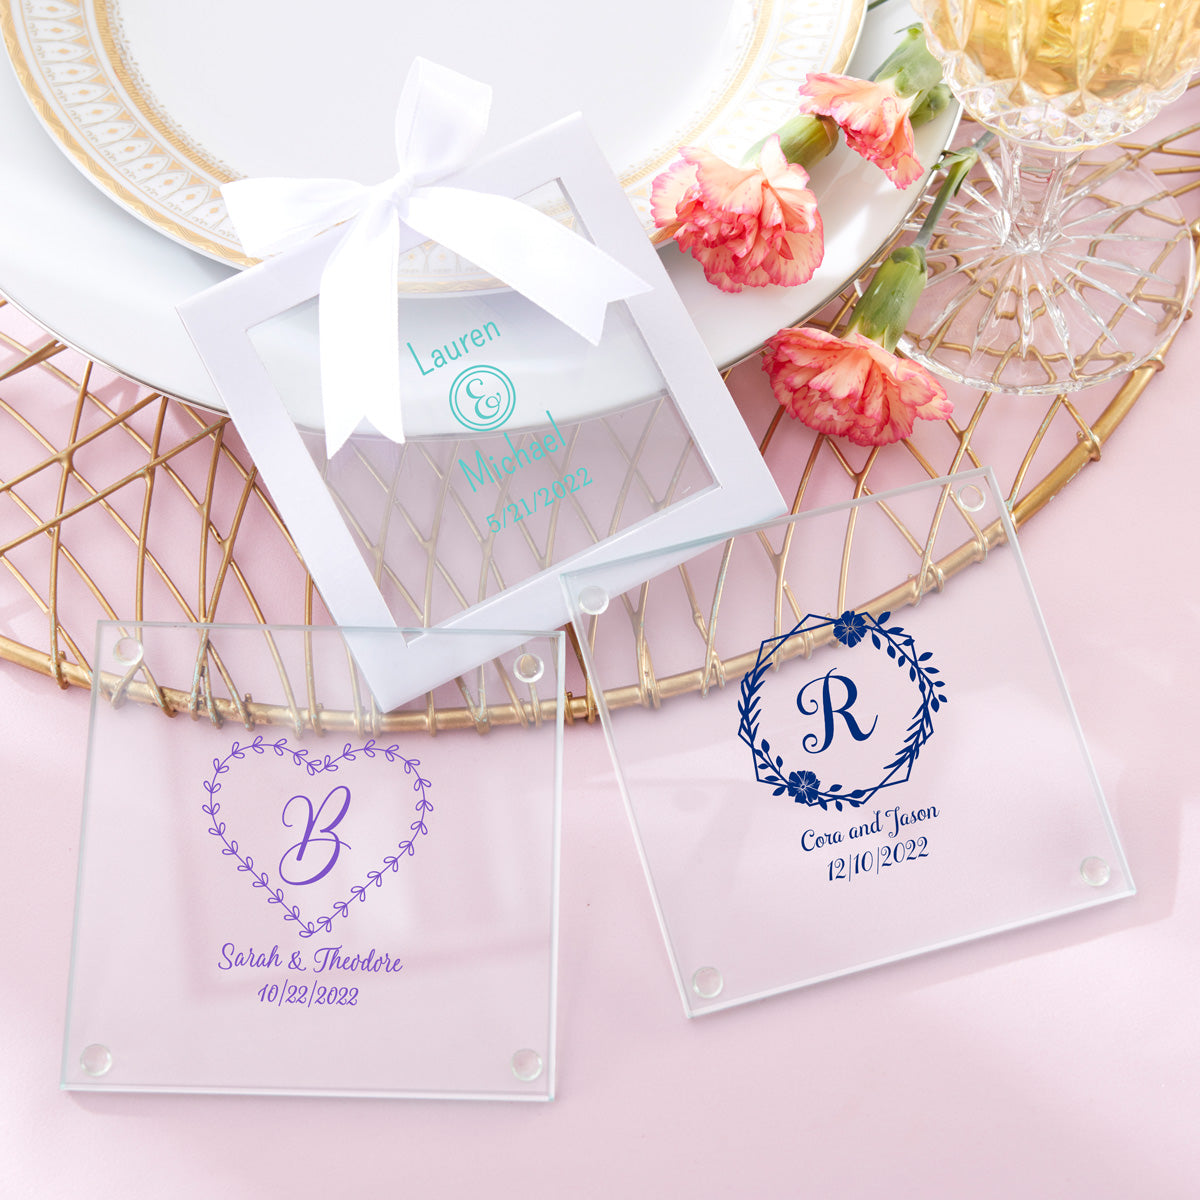 Personalized Glass Coaster (Set of 12) - Main Image1 | My Wedding Favors